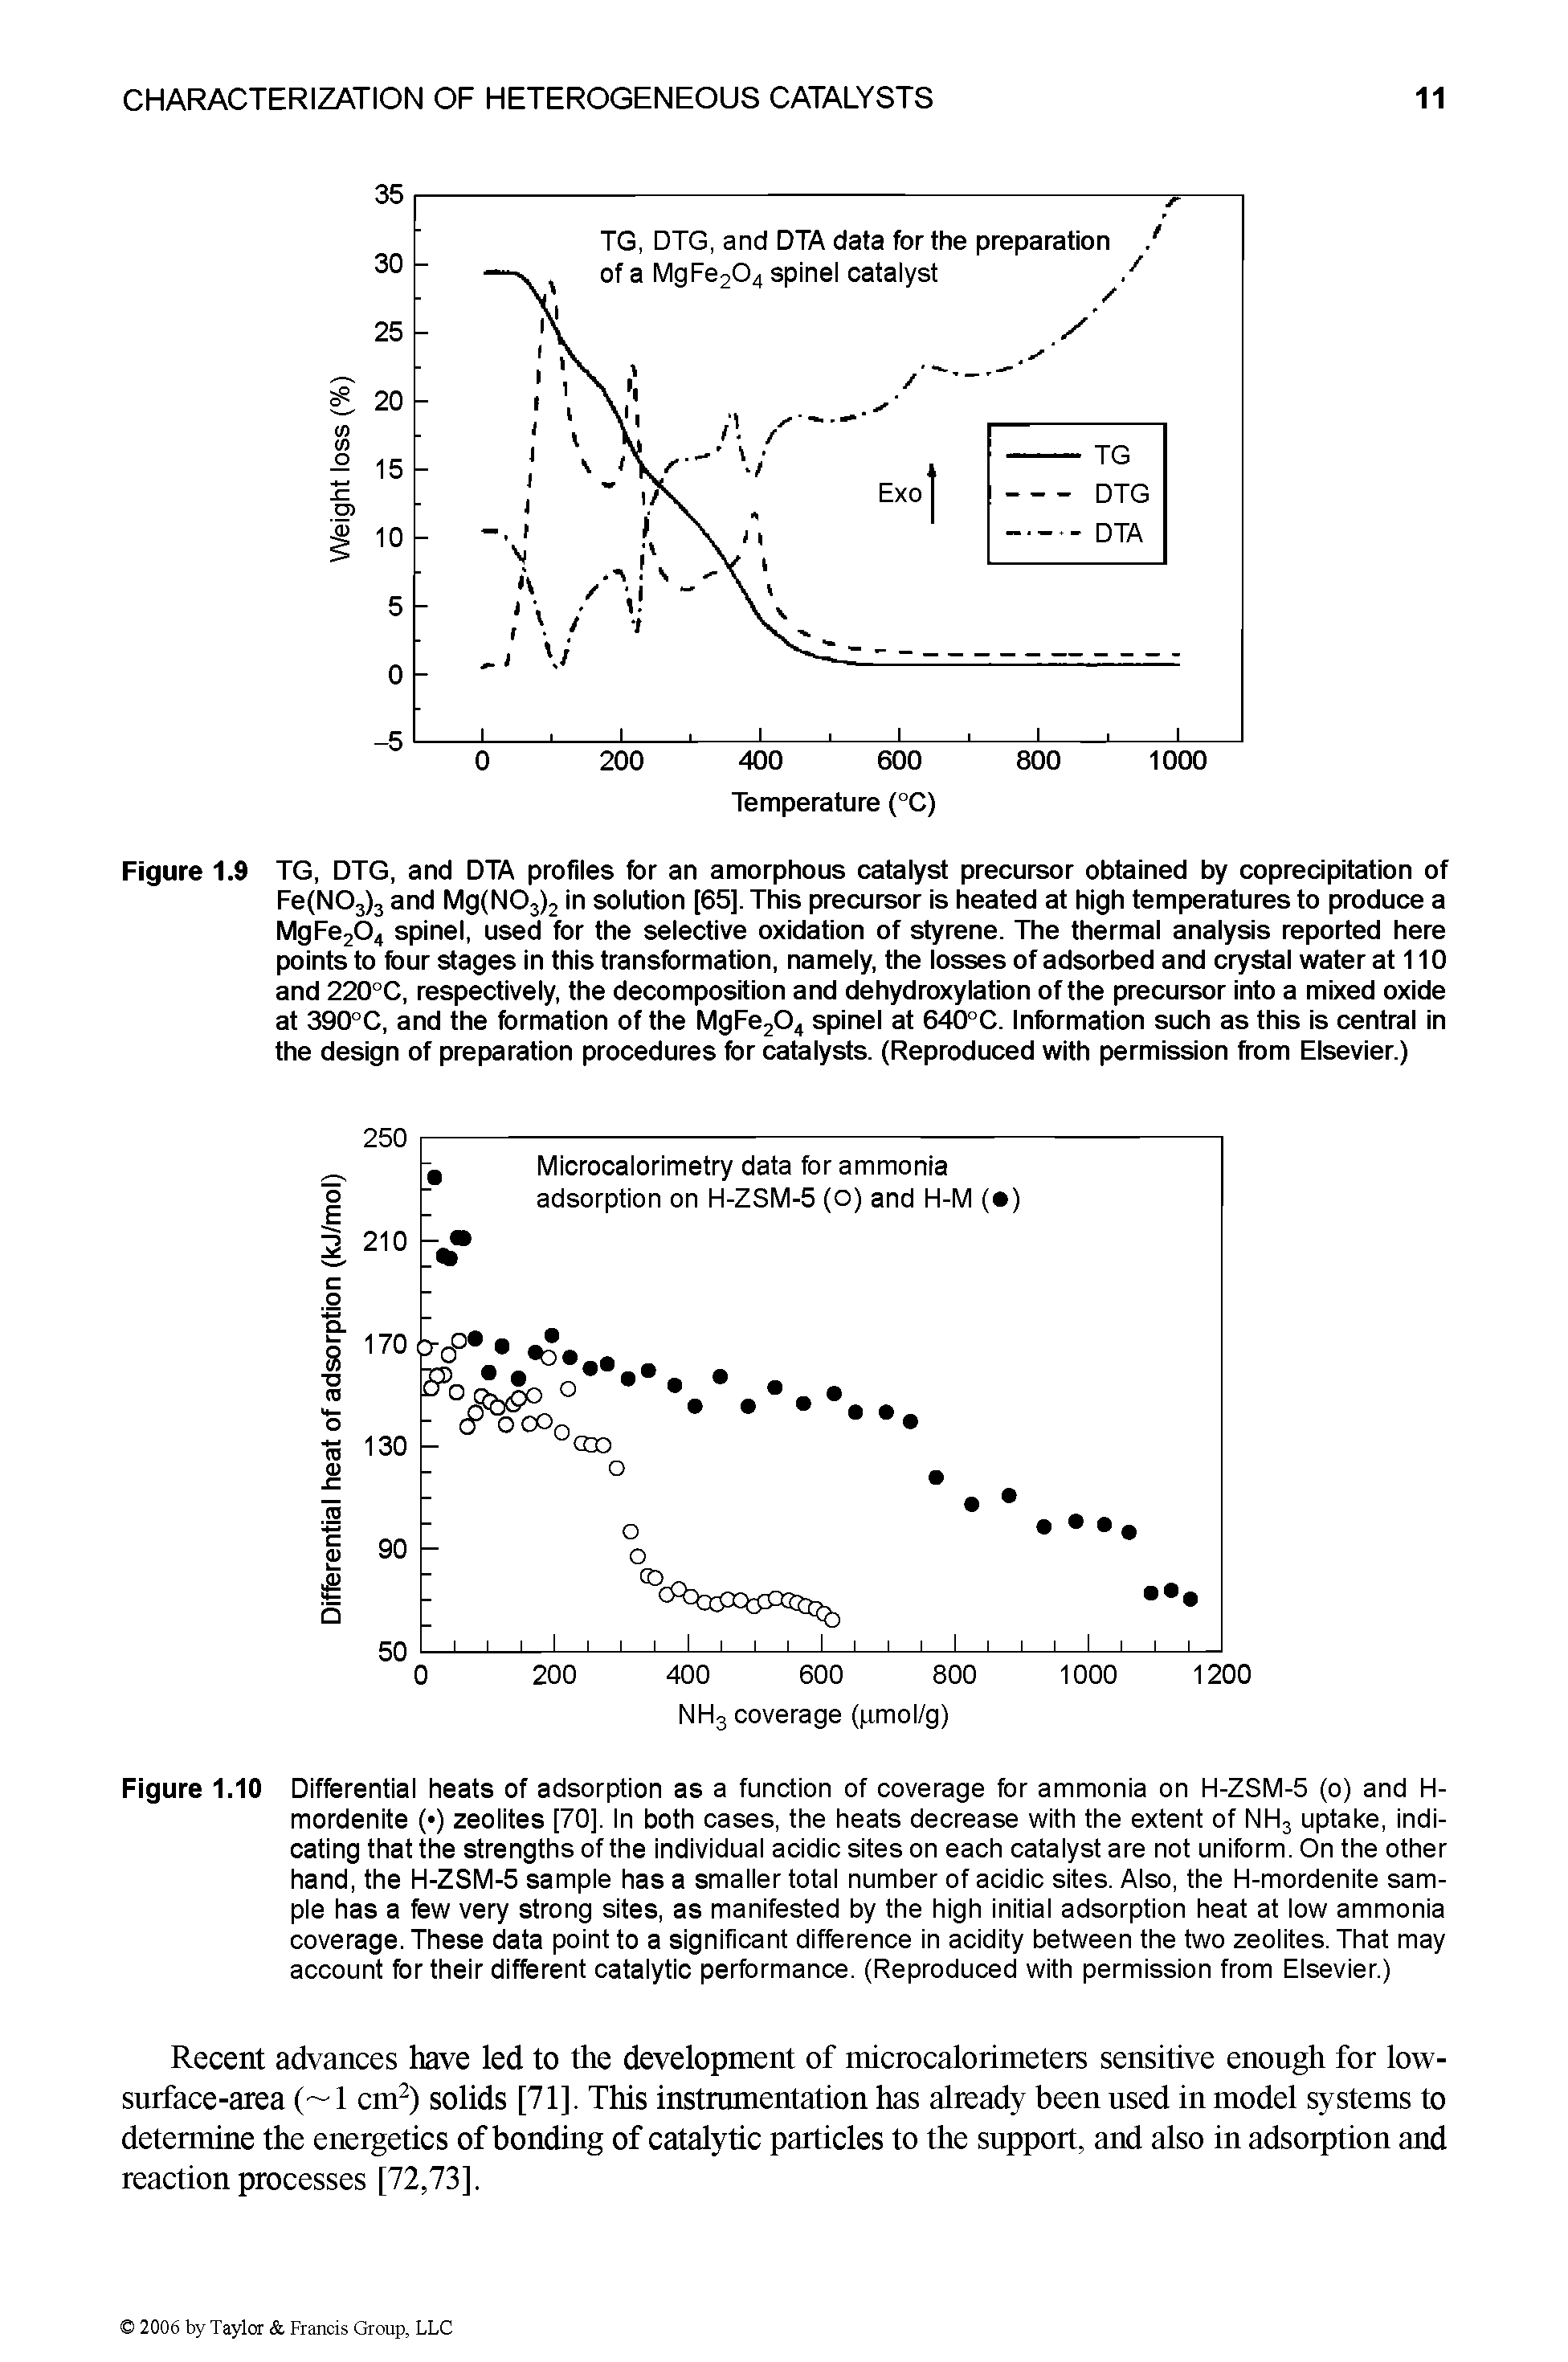 Figure 1.9 TG, DTG, and DTA profiles for an amorphous catalyst precursor obtained by coprecipitation of Fe(N03)3 and Mg(N03)2 in solution [65], This precursor is heated at high temperatures to produce a MgFe204 spinel, used for the selective oxidation of styrene. The thermal analysis reported here points to four stages in this transformation, namely, the losses of adsorbed and crystal water at 110 and 220°C, respectively, the decomposition and dehydroxylation of the precursor into a mixed oxide at 390°C, and the formation of the MgFe204 spinel at 640°C. Information such as this is central in the design of preparation procedures for catalysts. (Reproduced with permission from Elsevier.)...